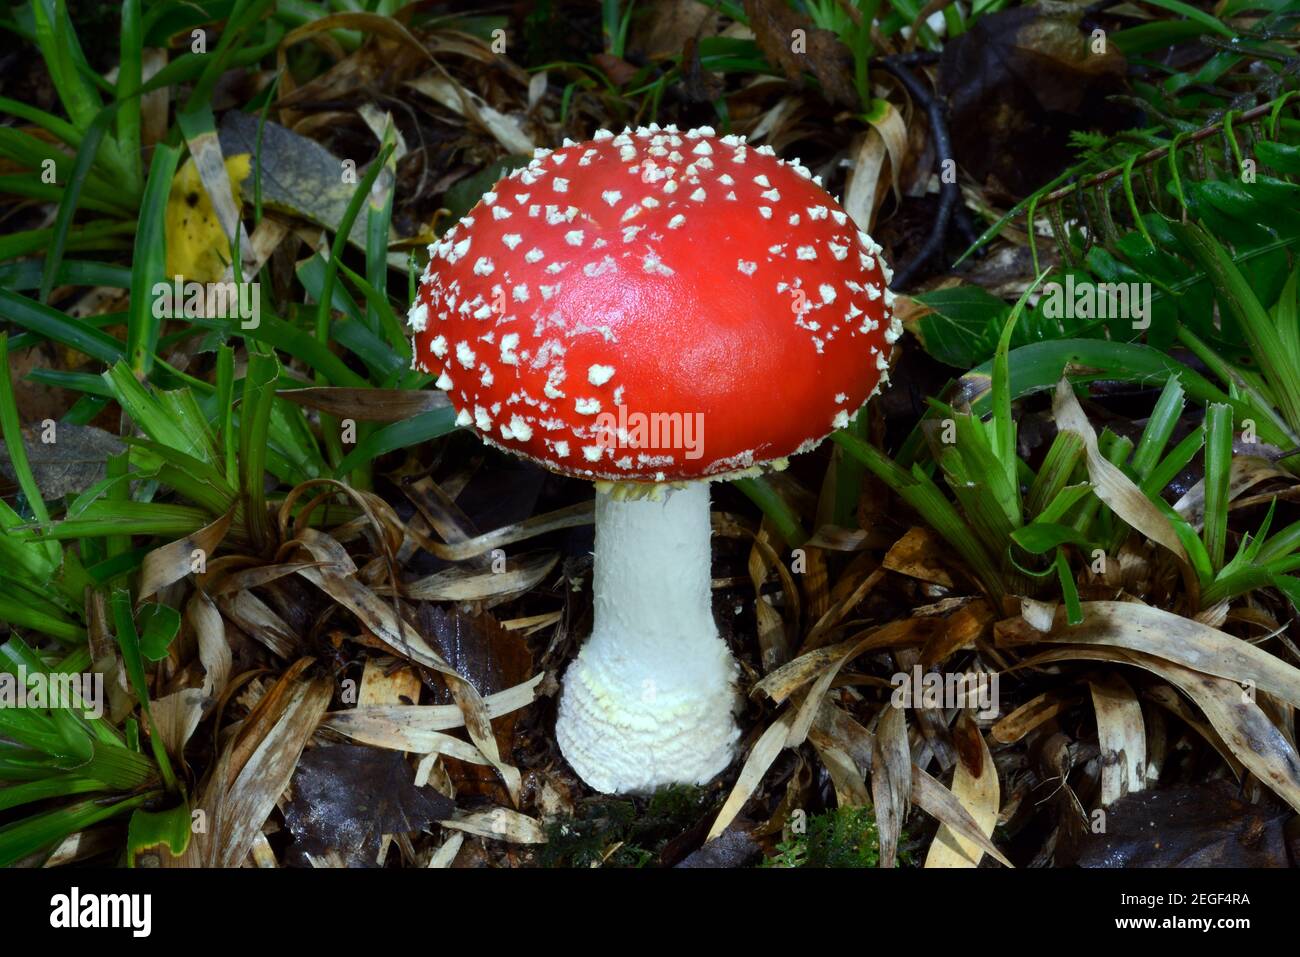 The fungus Amanita muscaria (fly agaric) is native throughout the temperate and boreal regions of the Northern Hemisphere. Stock Photo